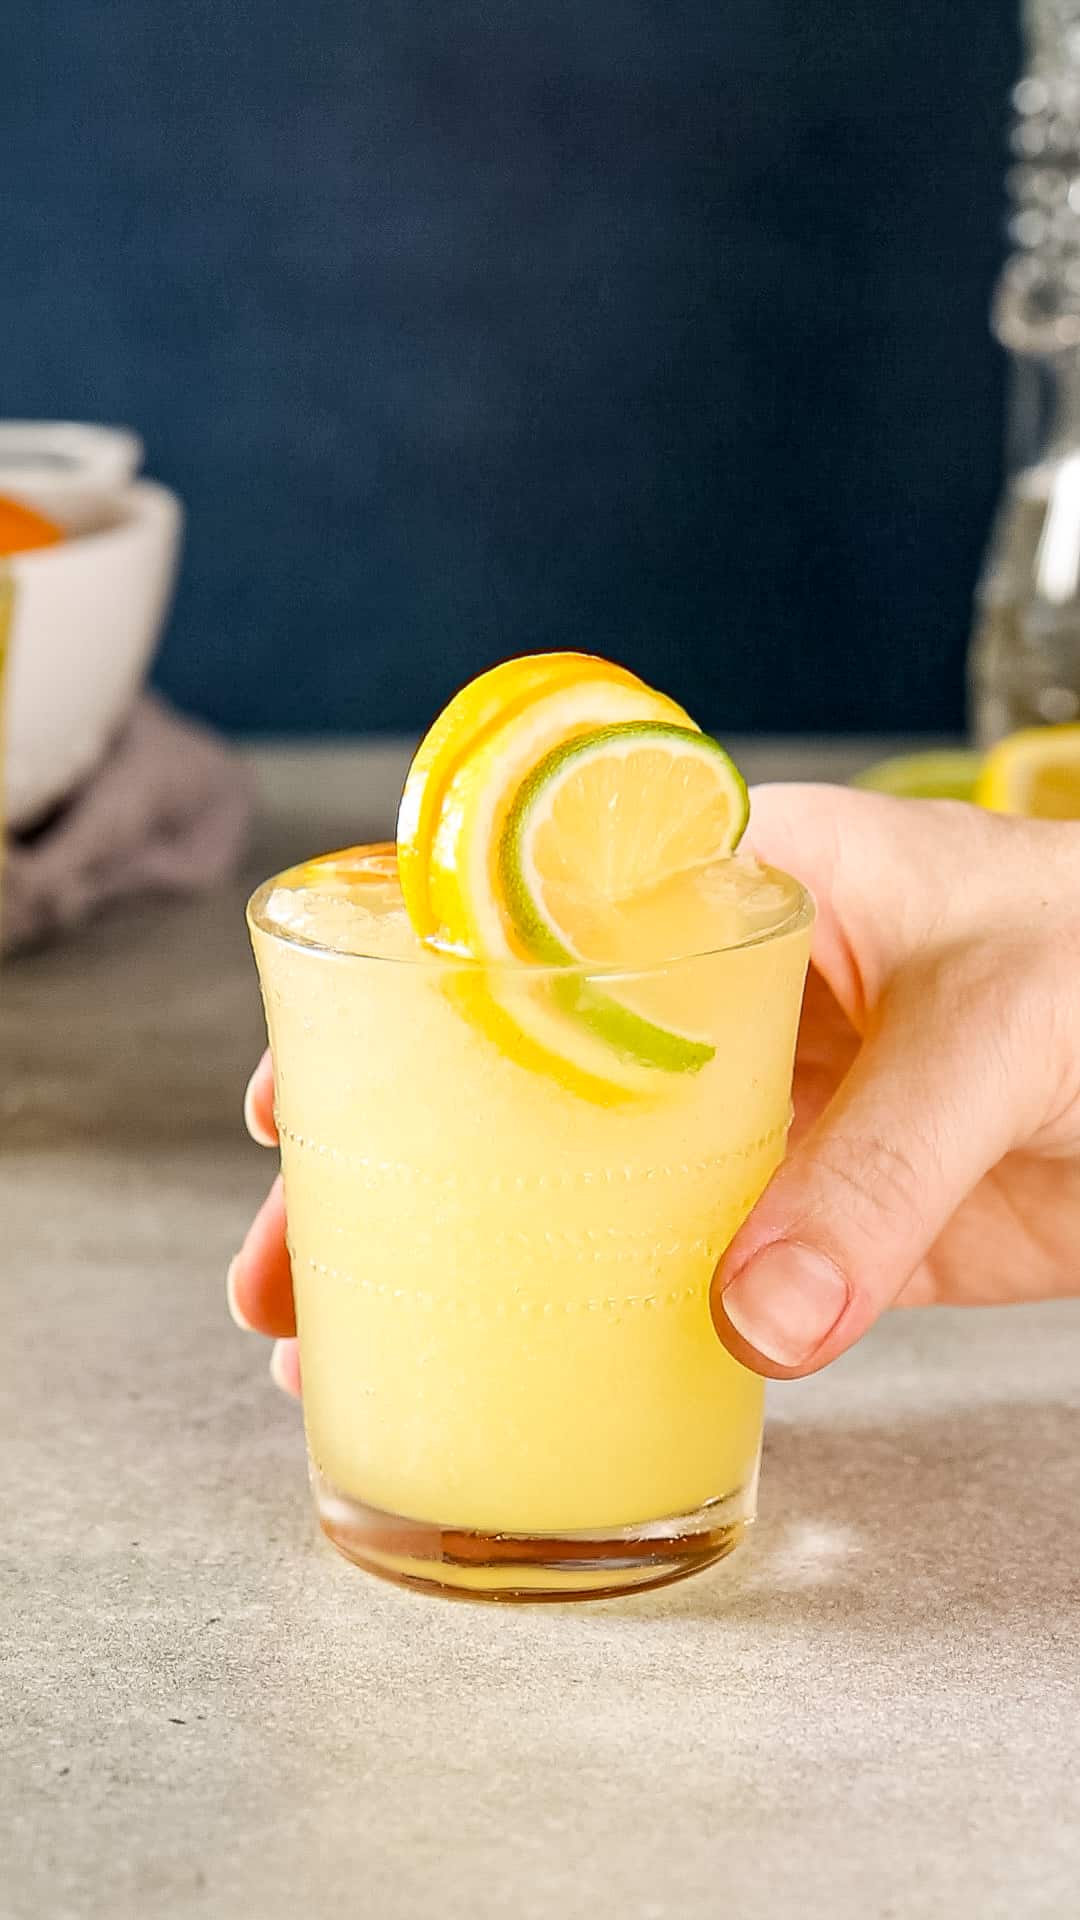 Hand about to pick up a Citrus Slush mocktail from a gray countertop.